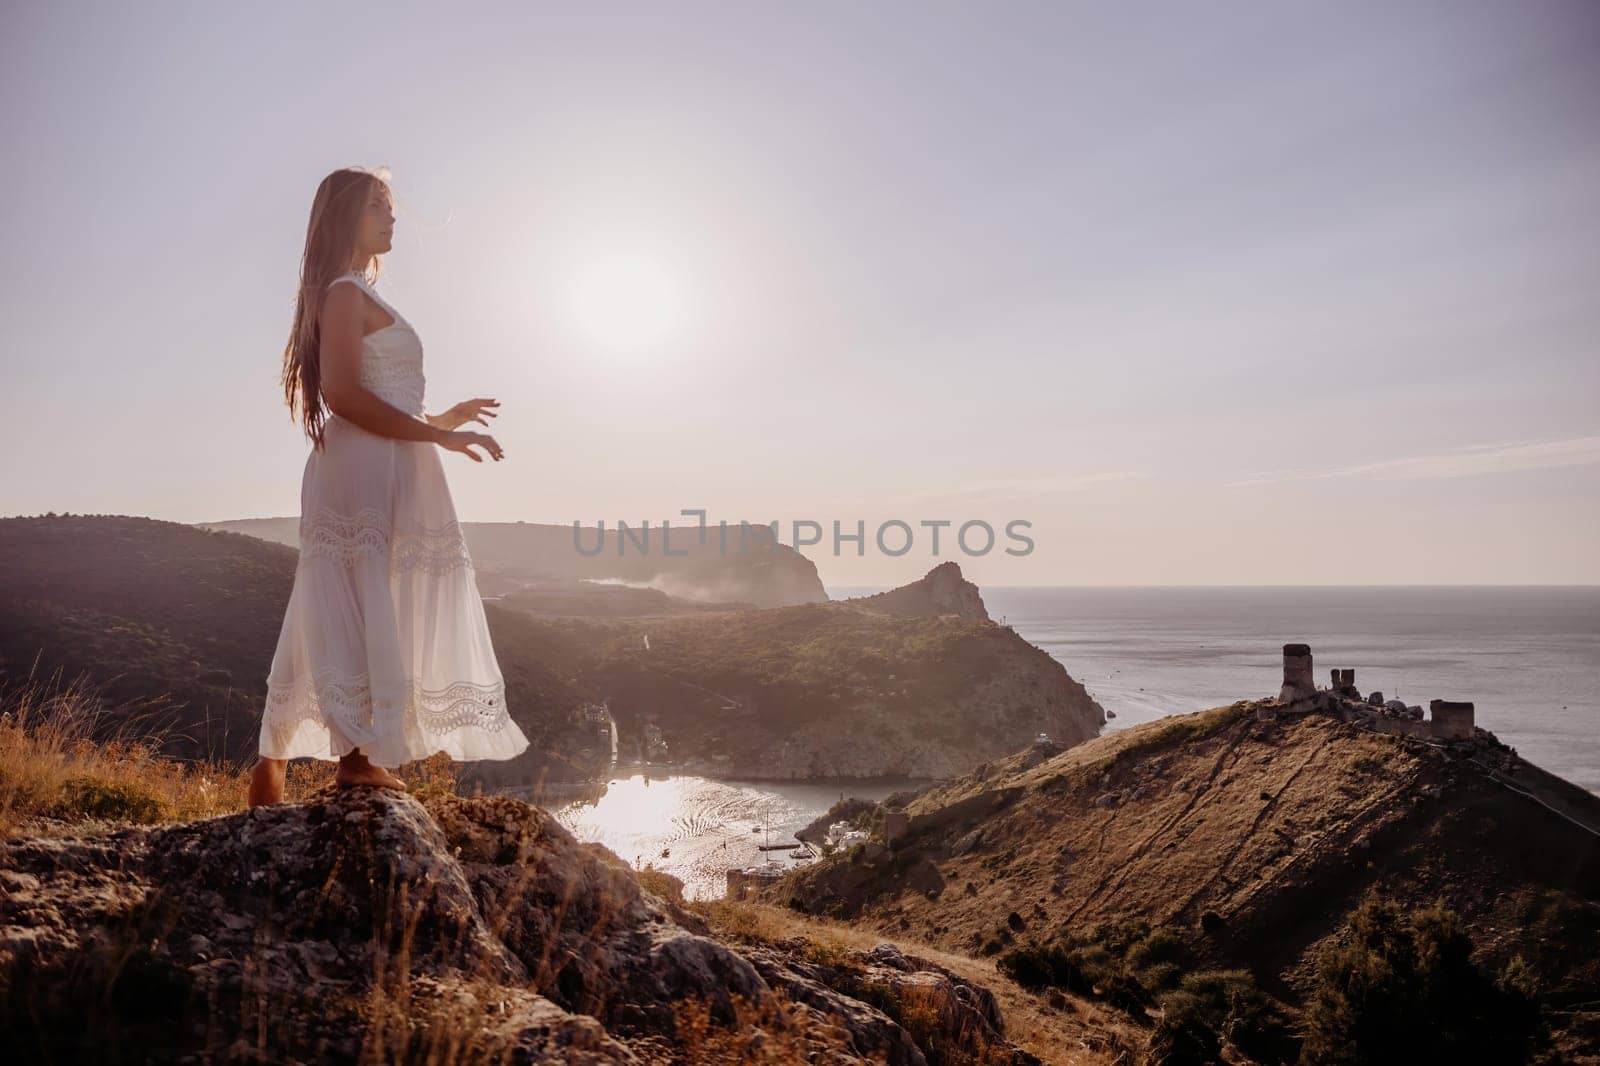 A woman stands on a rocky hill overlooking the ocean. She is wearing a white dress and she is enjoying the view. The scene is serene and peaceful, with the sun shining brightly in the background. by Matiunina